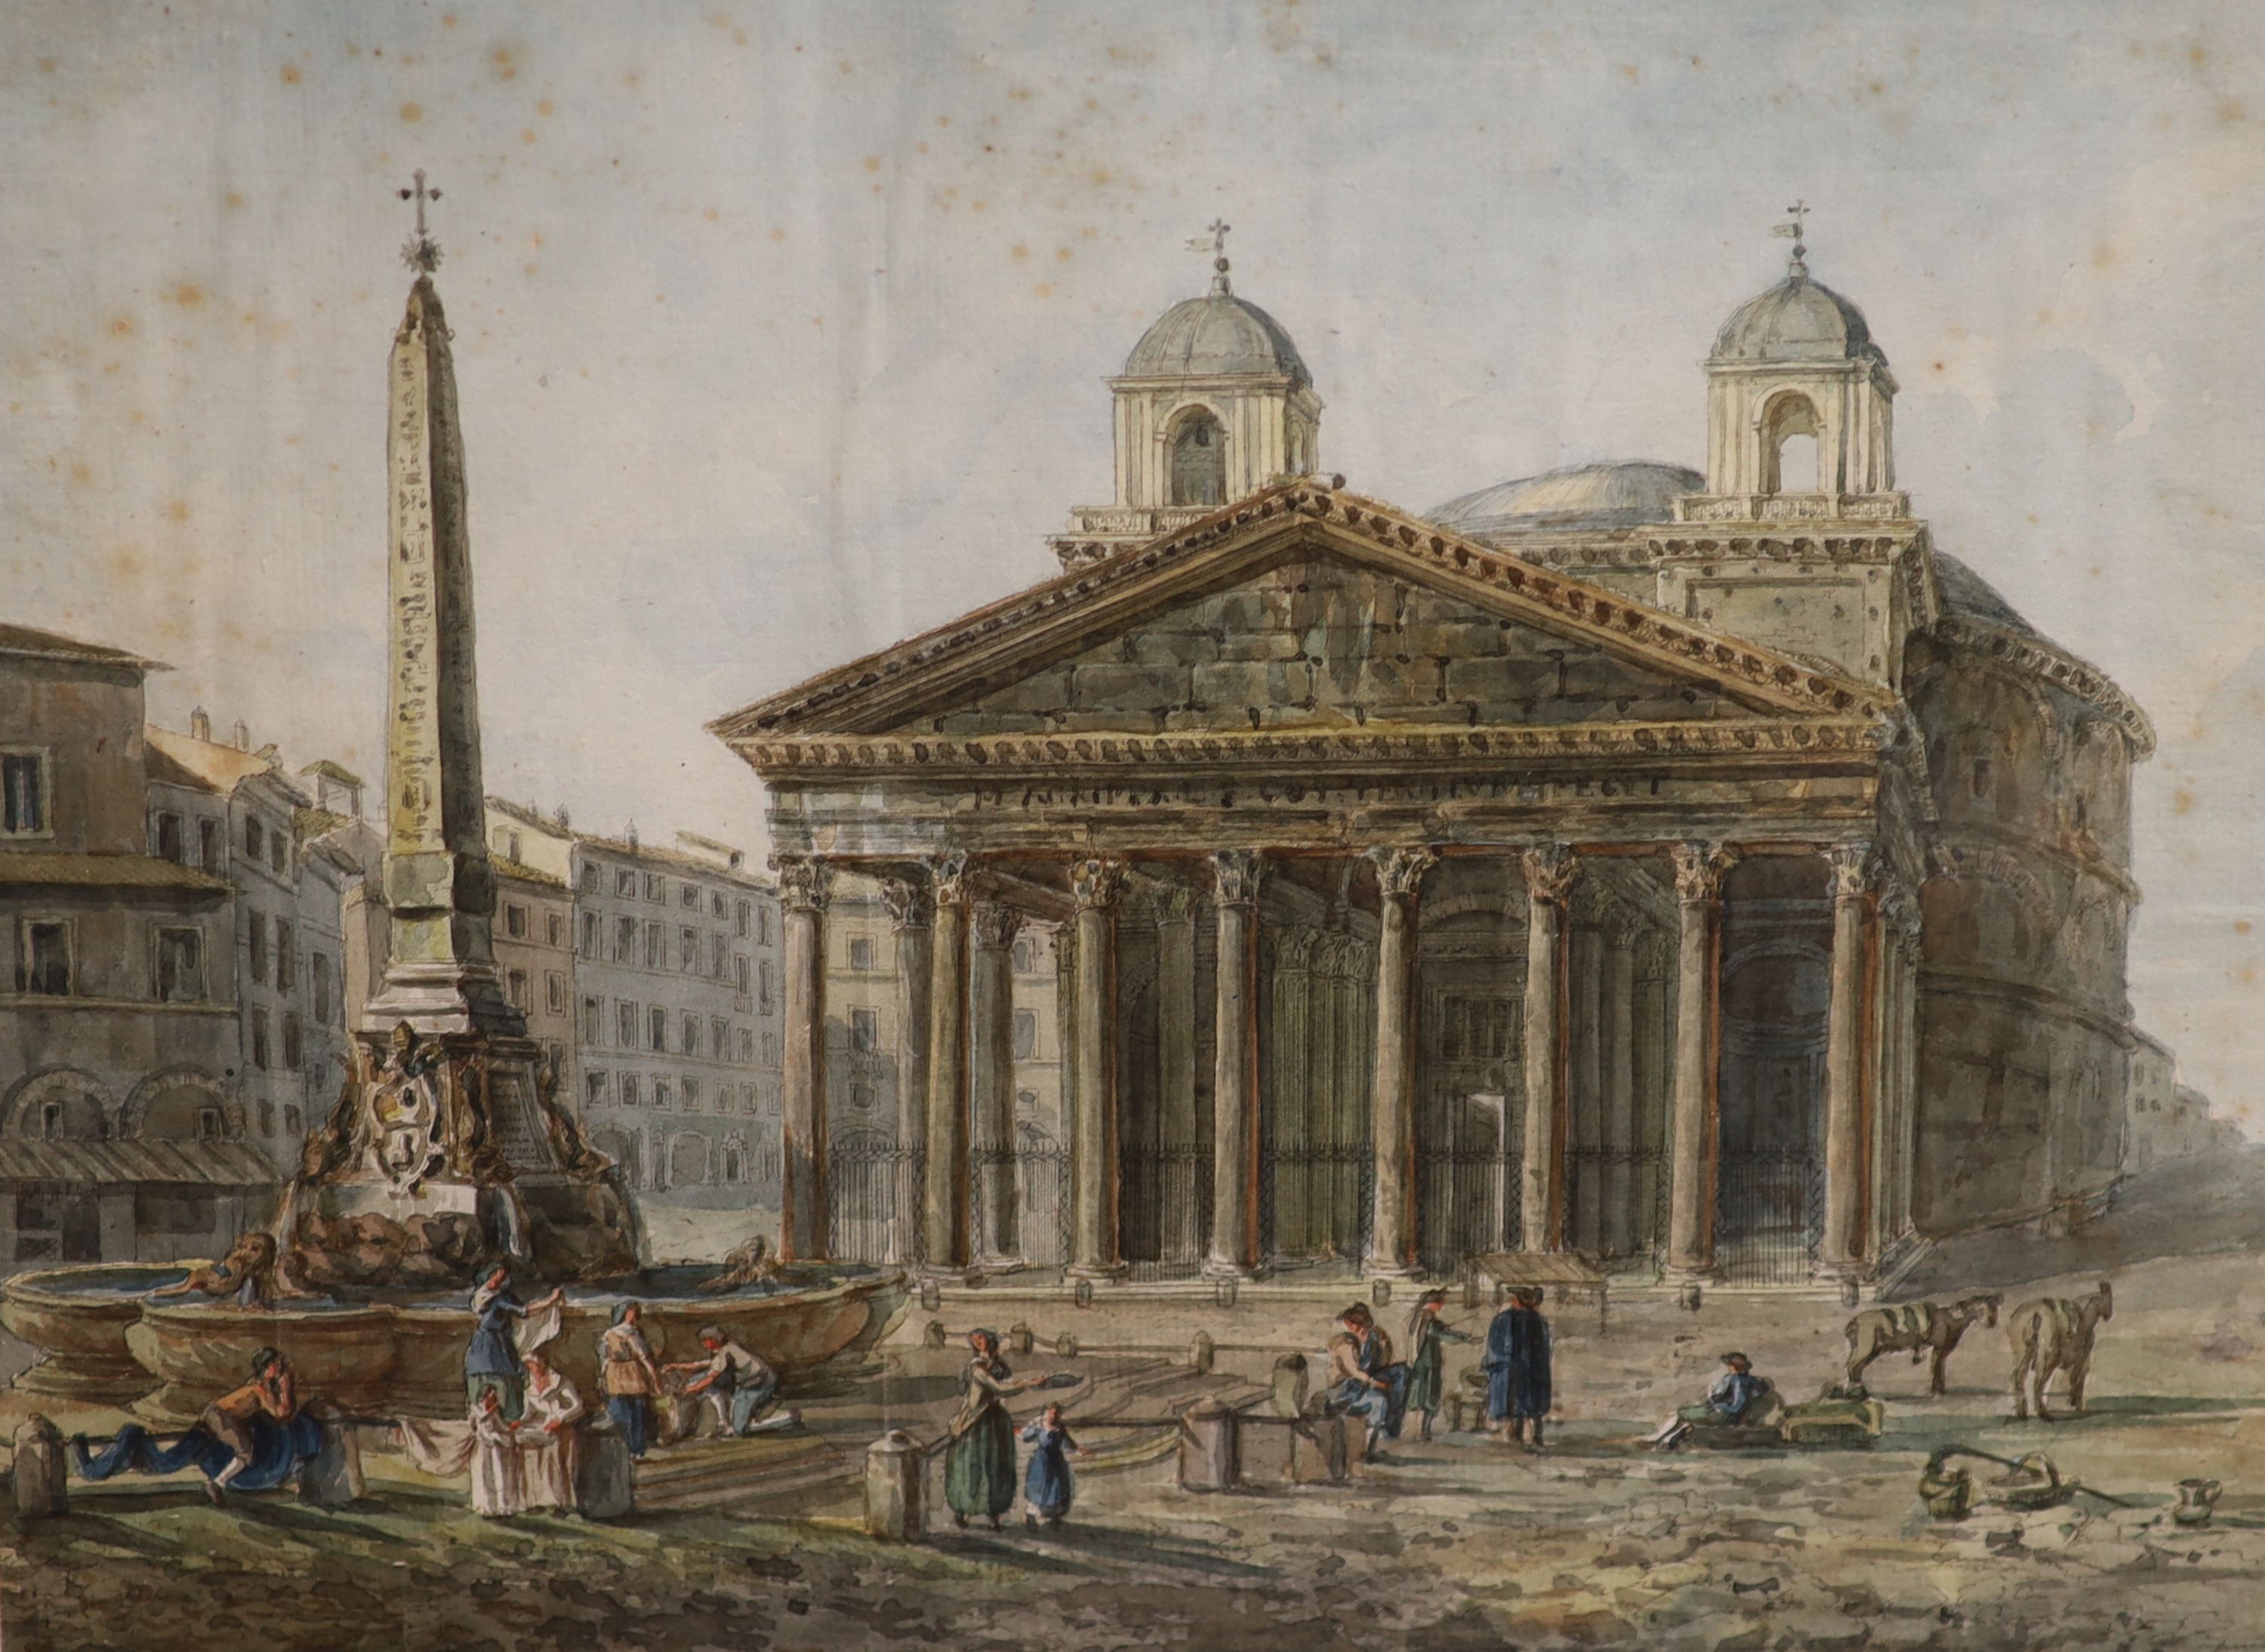 James Forbes (1749-1819), Rome: Pantheon, Colosseum and Campidoglio, set of three watercolours, 22 x 28.5cm